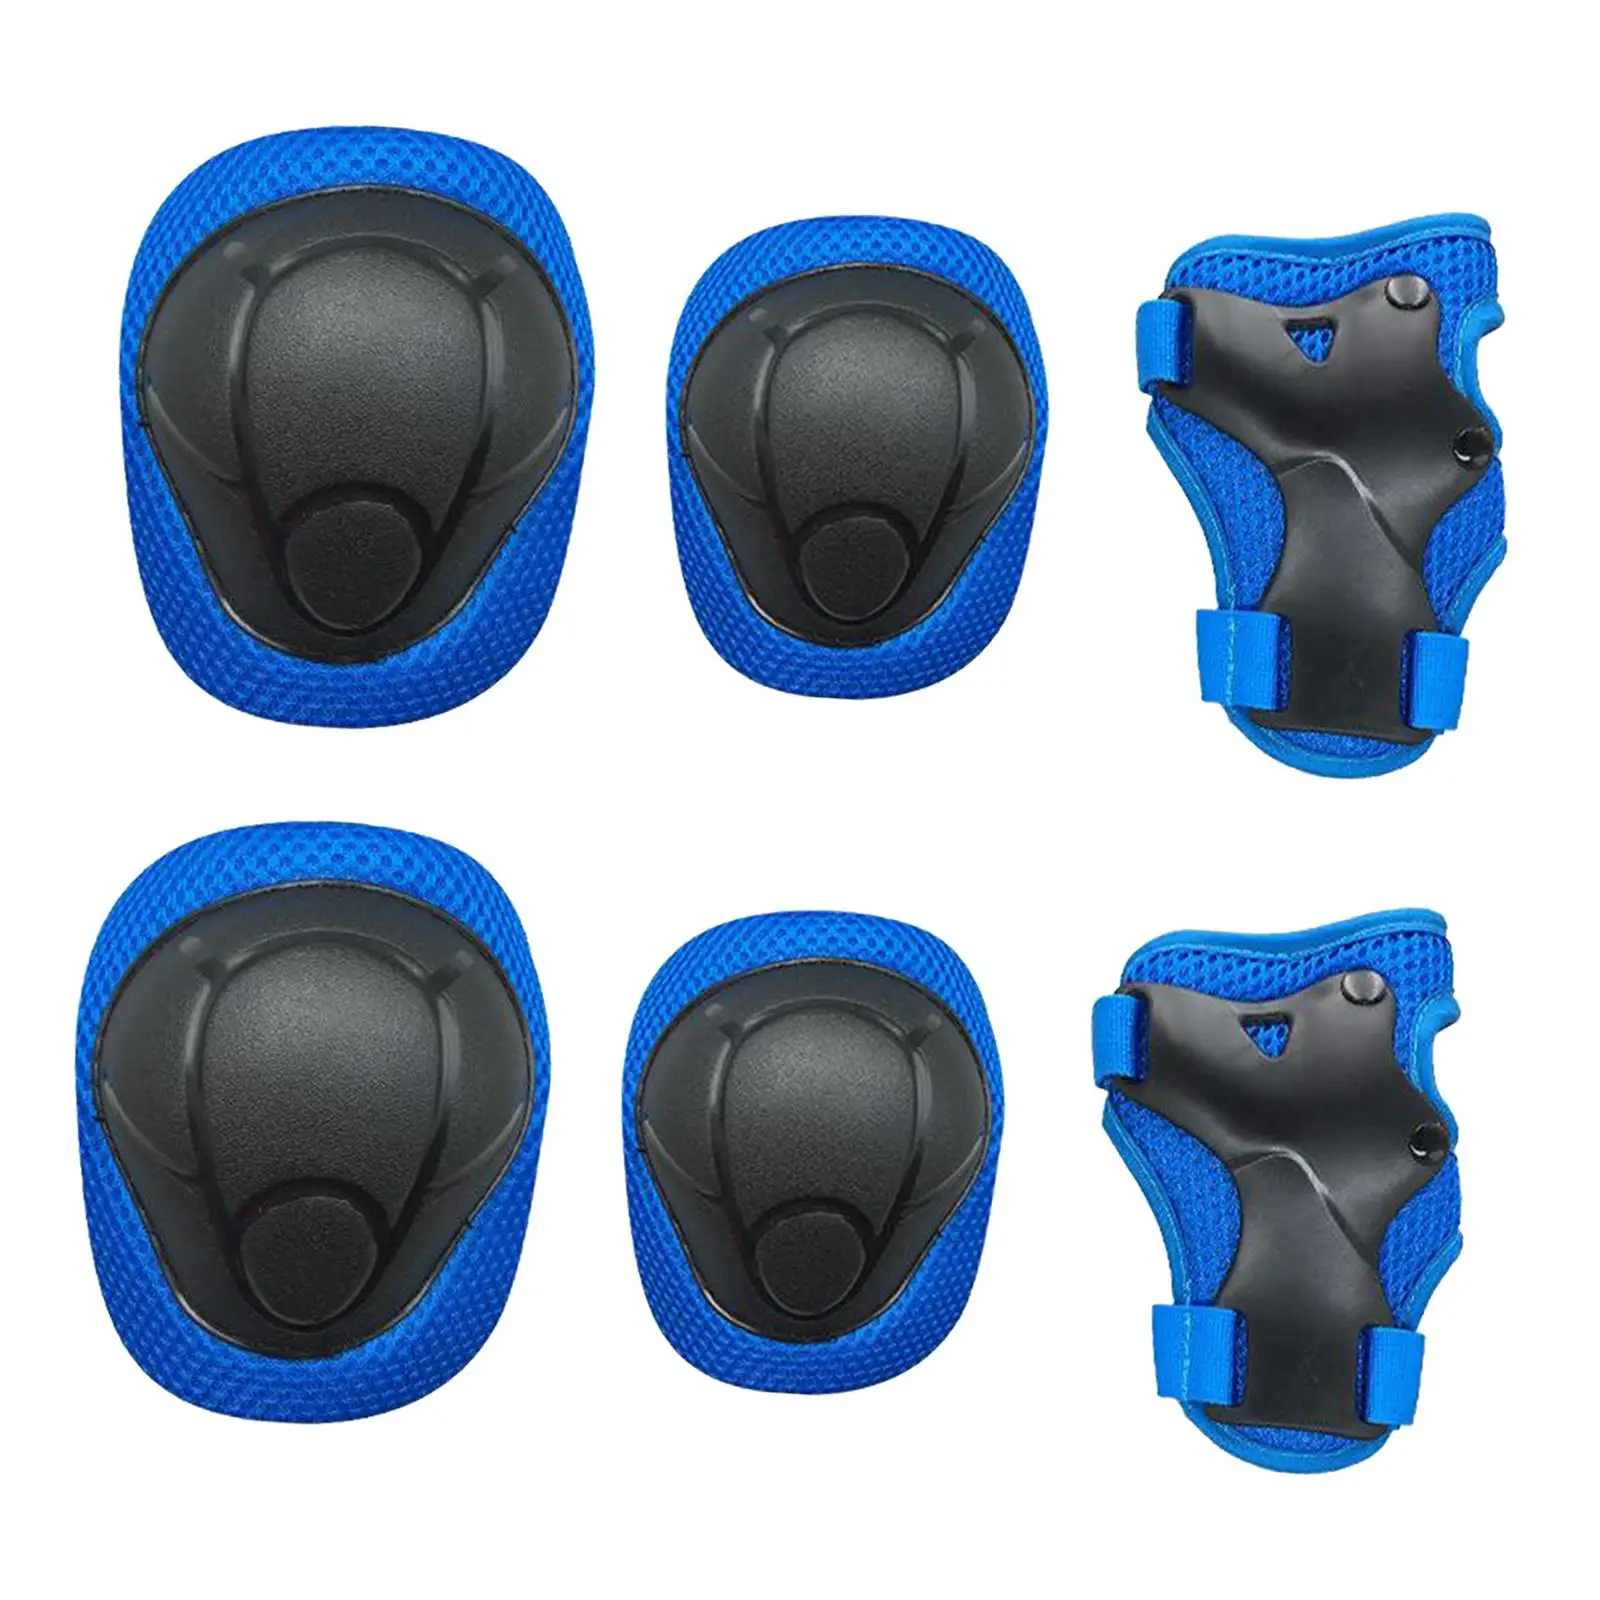 Kids Toddler Knee Pad Elbow Pads Wrist Guards Protective Gear Set for Cycling Skateboard Inline Skatings Riding 